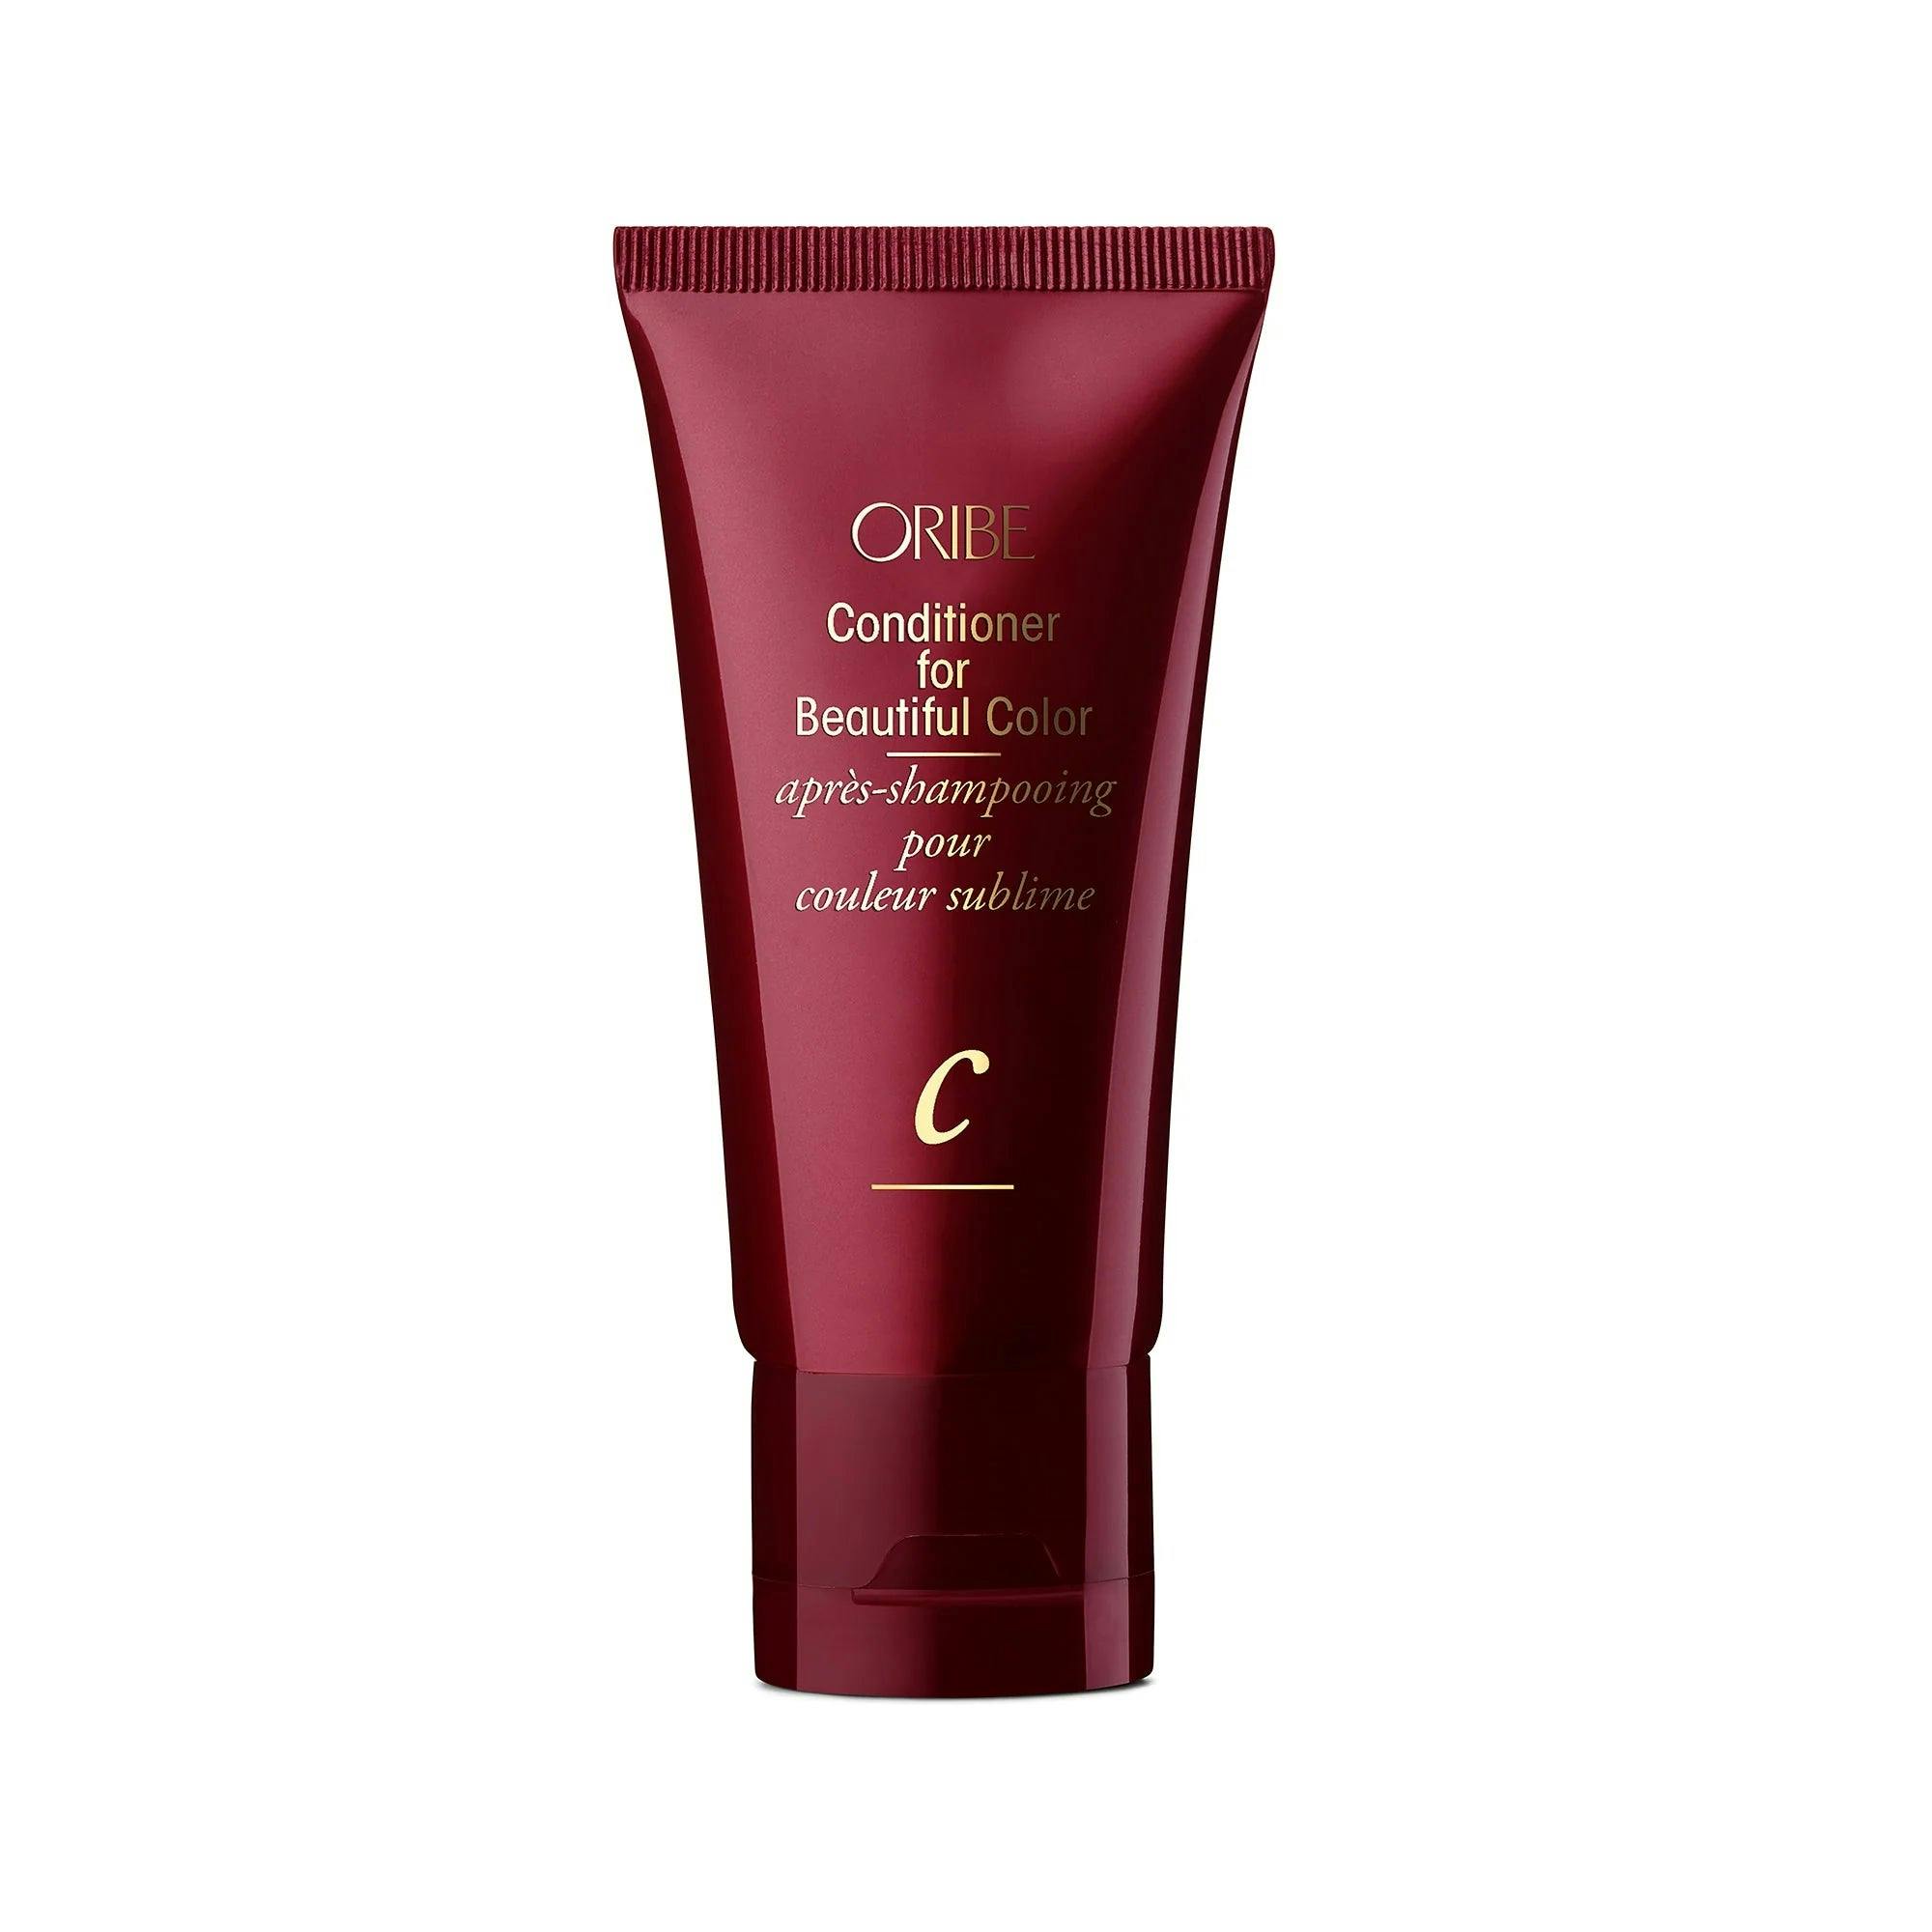 Oribe Conditioner for Beautiful Color 50ml